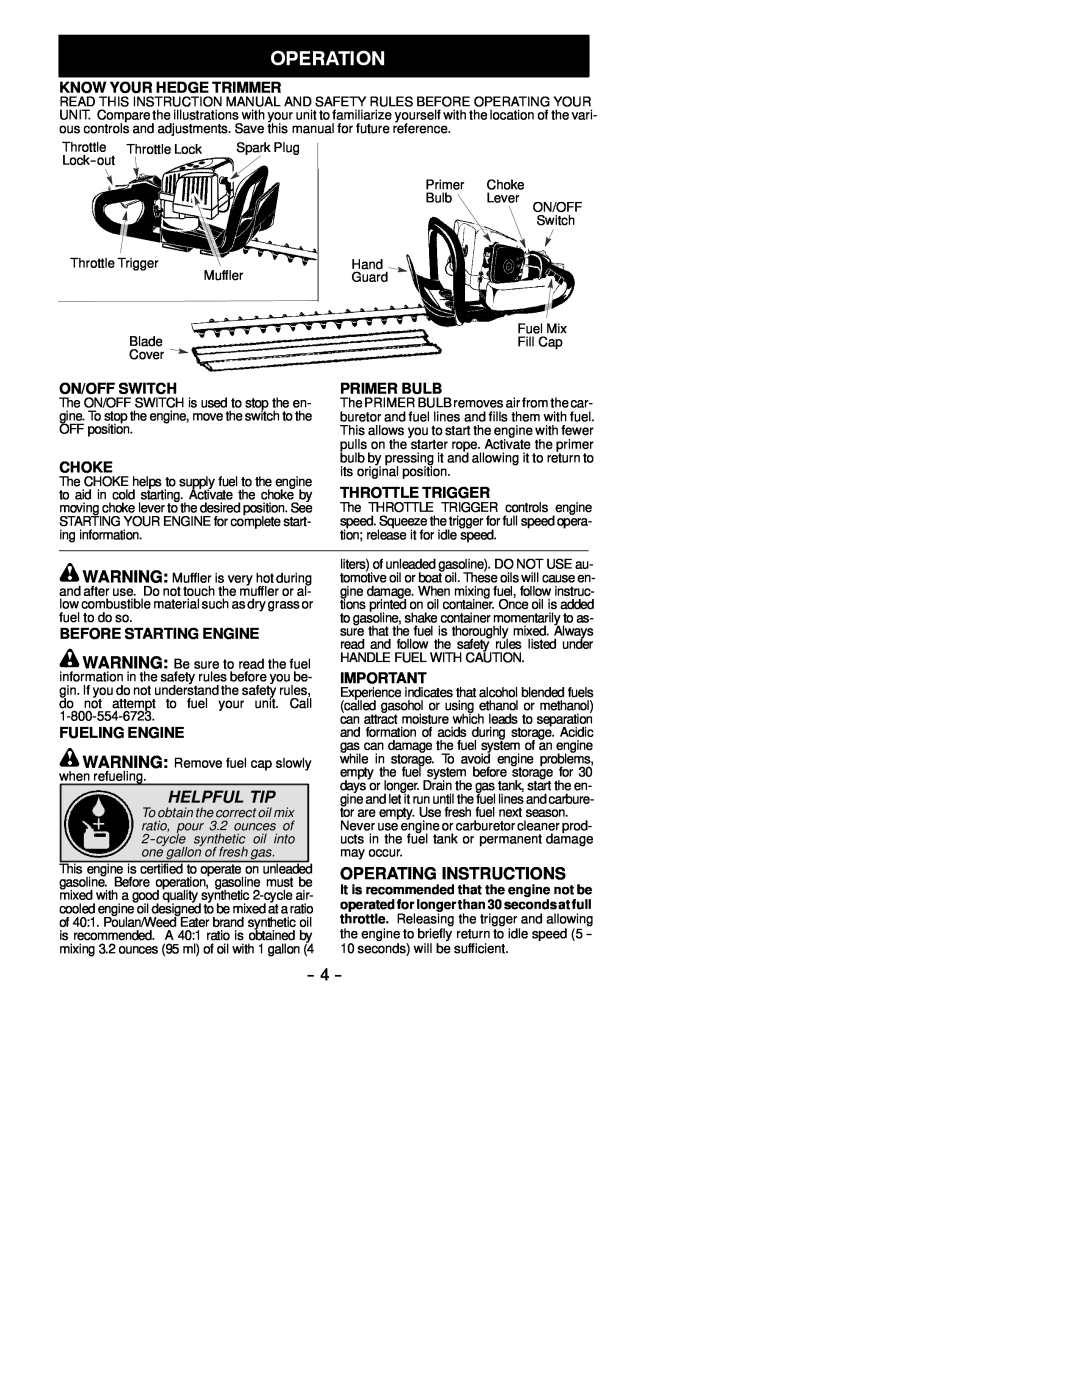 Sears 25 HHT Helpful Tip, Operating Instructions, Know Your Hedge Trimmer, On/Off Switch, Primer Bulb, Choke 